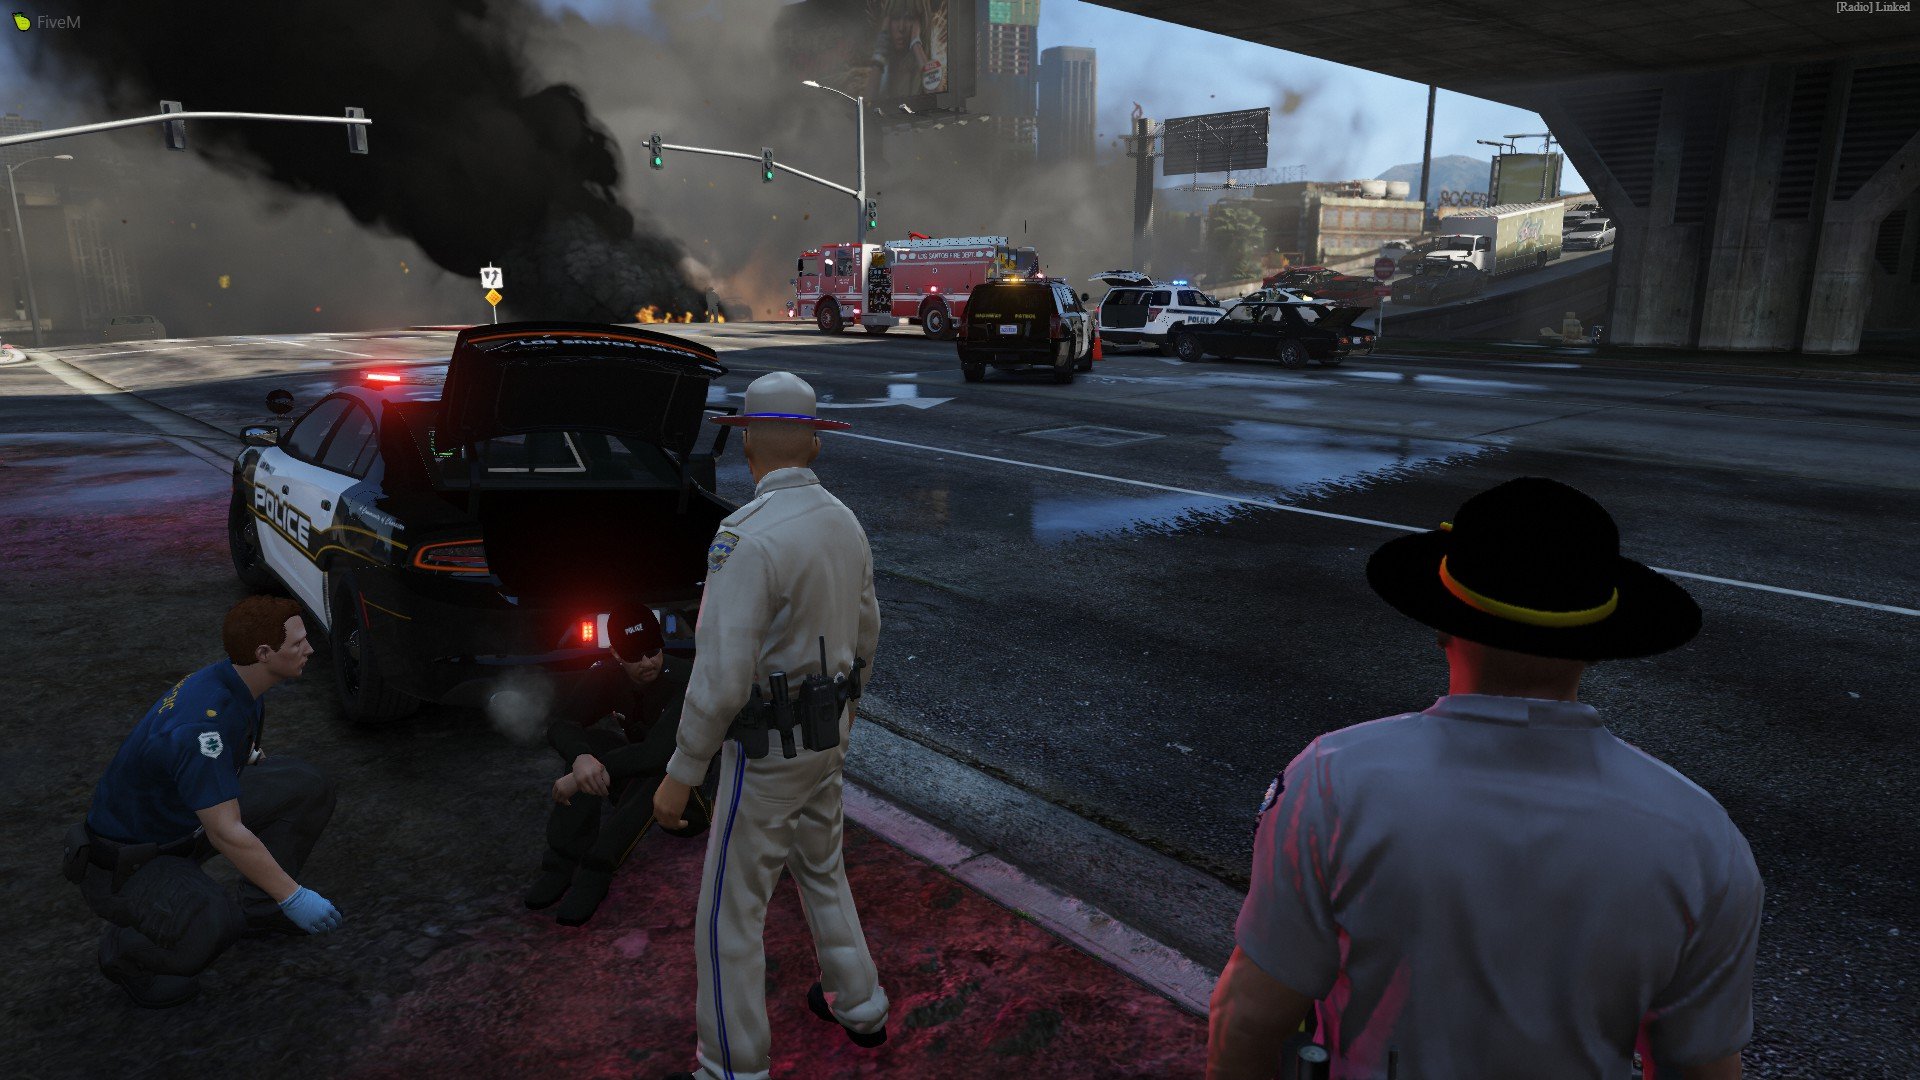 Shots Fired turns into Vehicle Fire